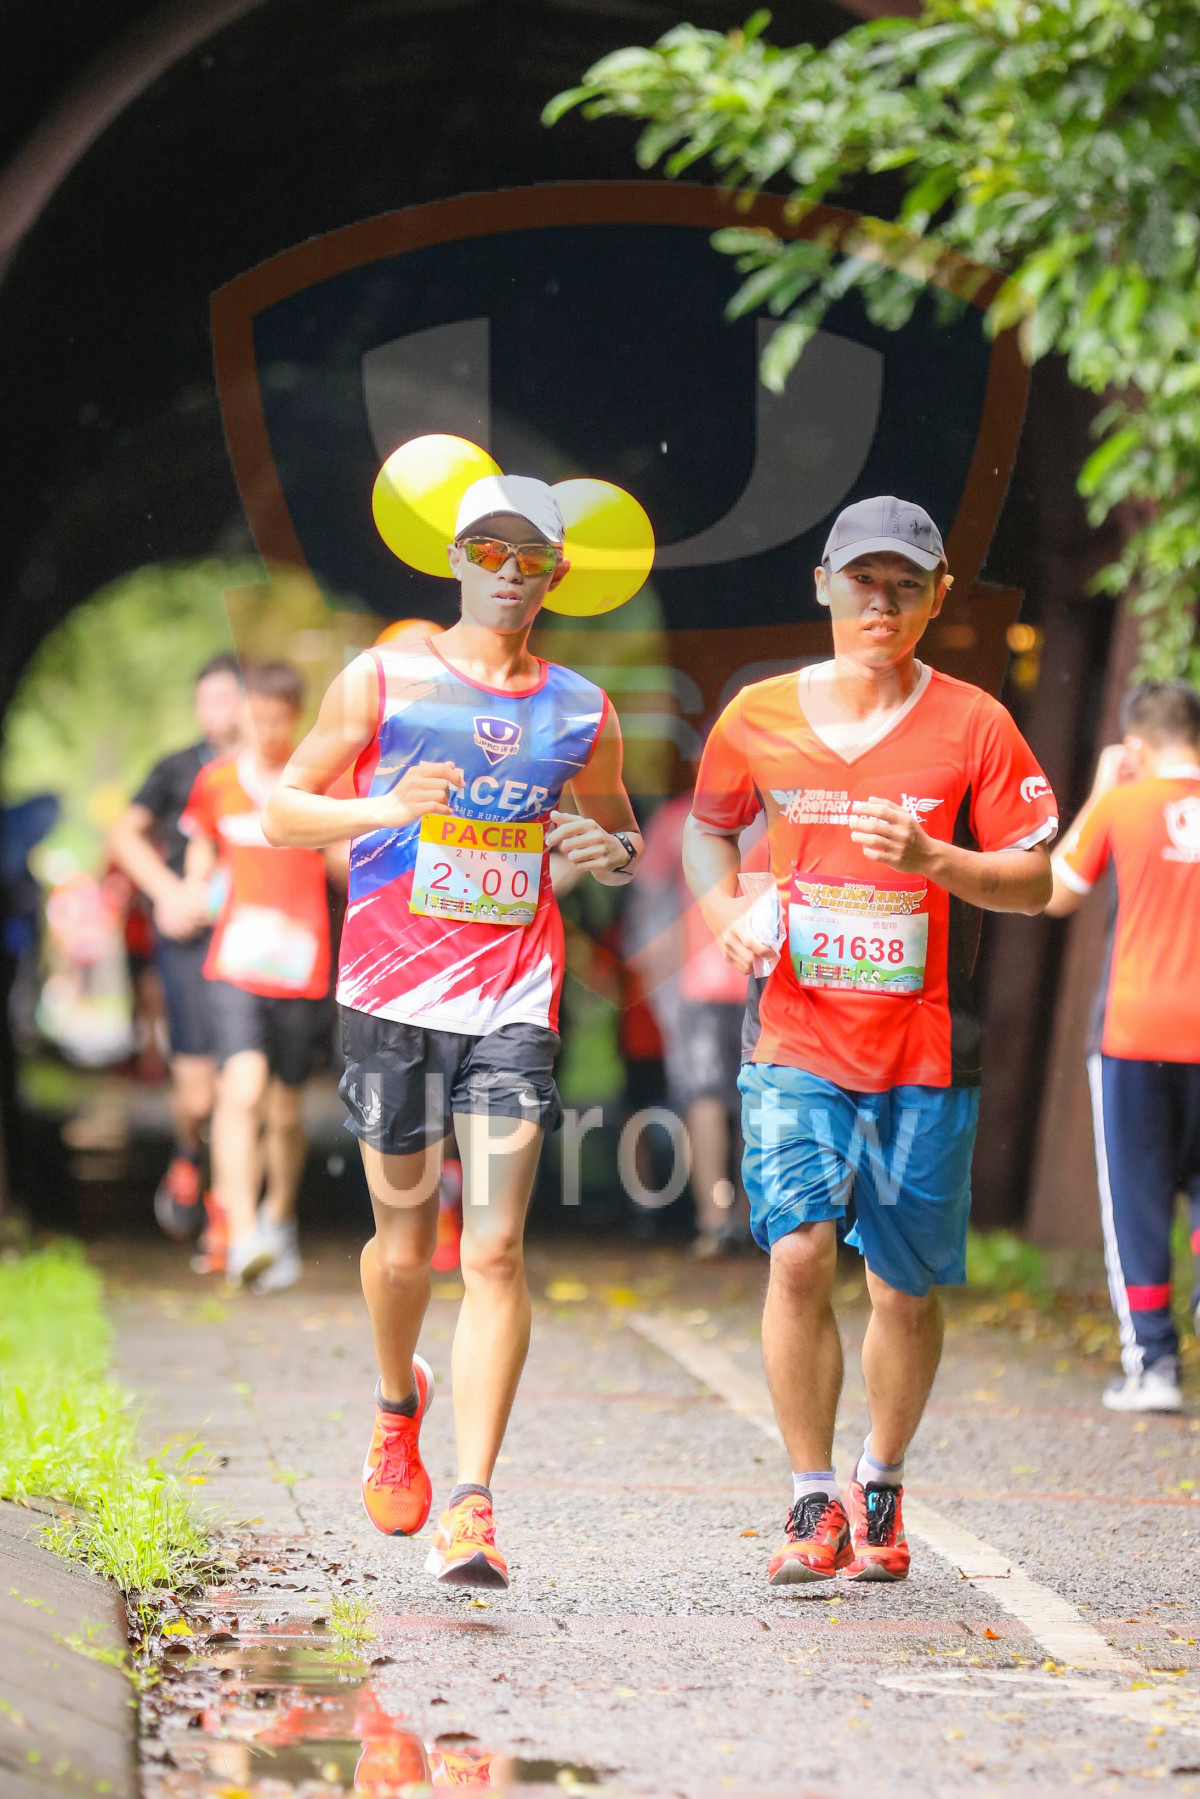 CER,RTARY,PACER,2 1 K 1,2:00,a,21638|